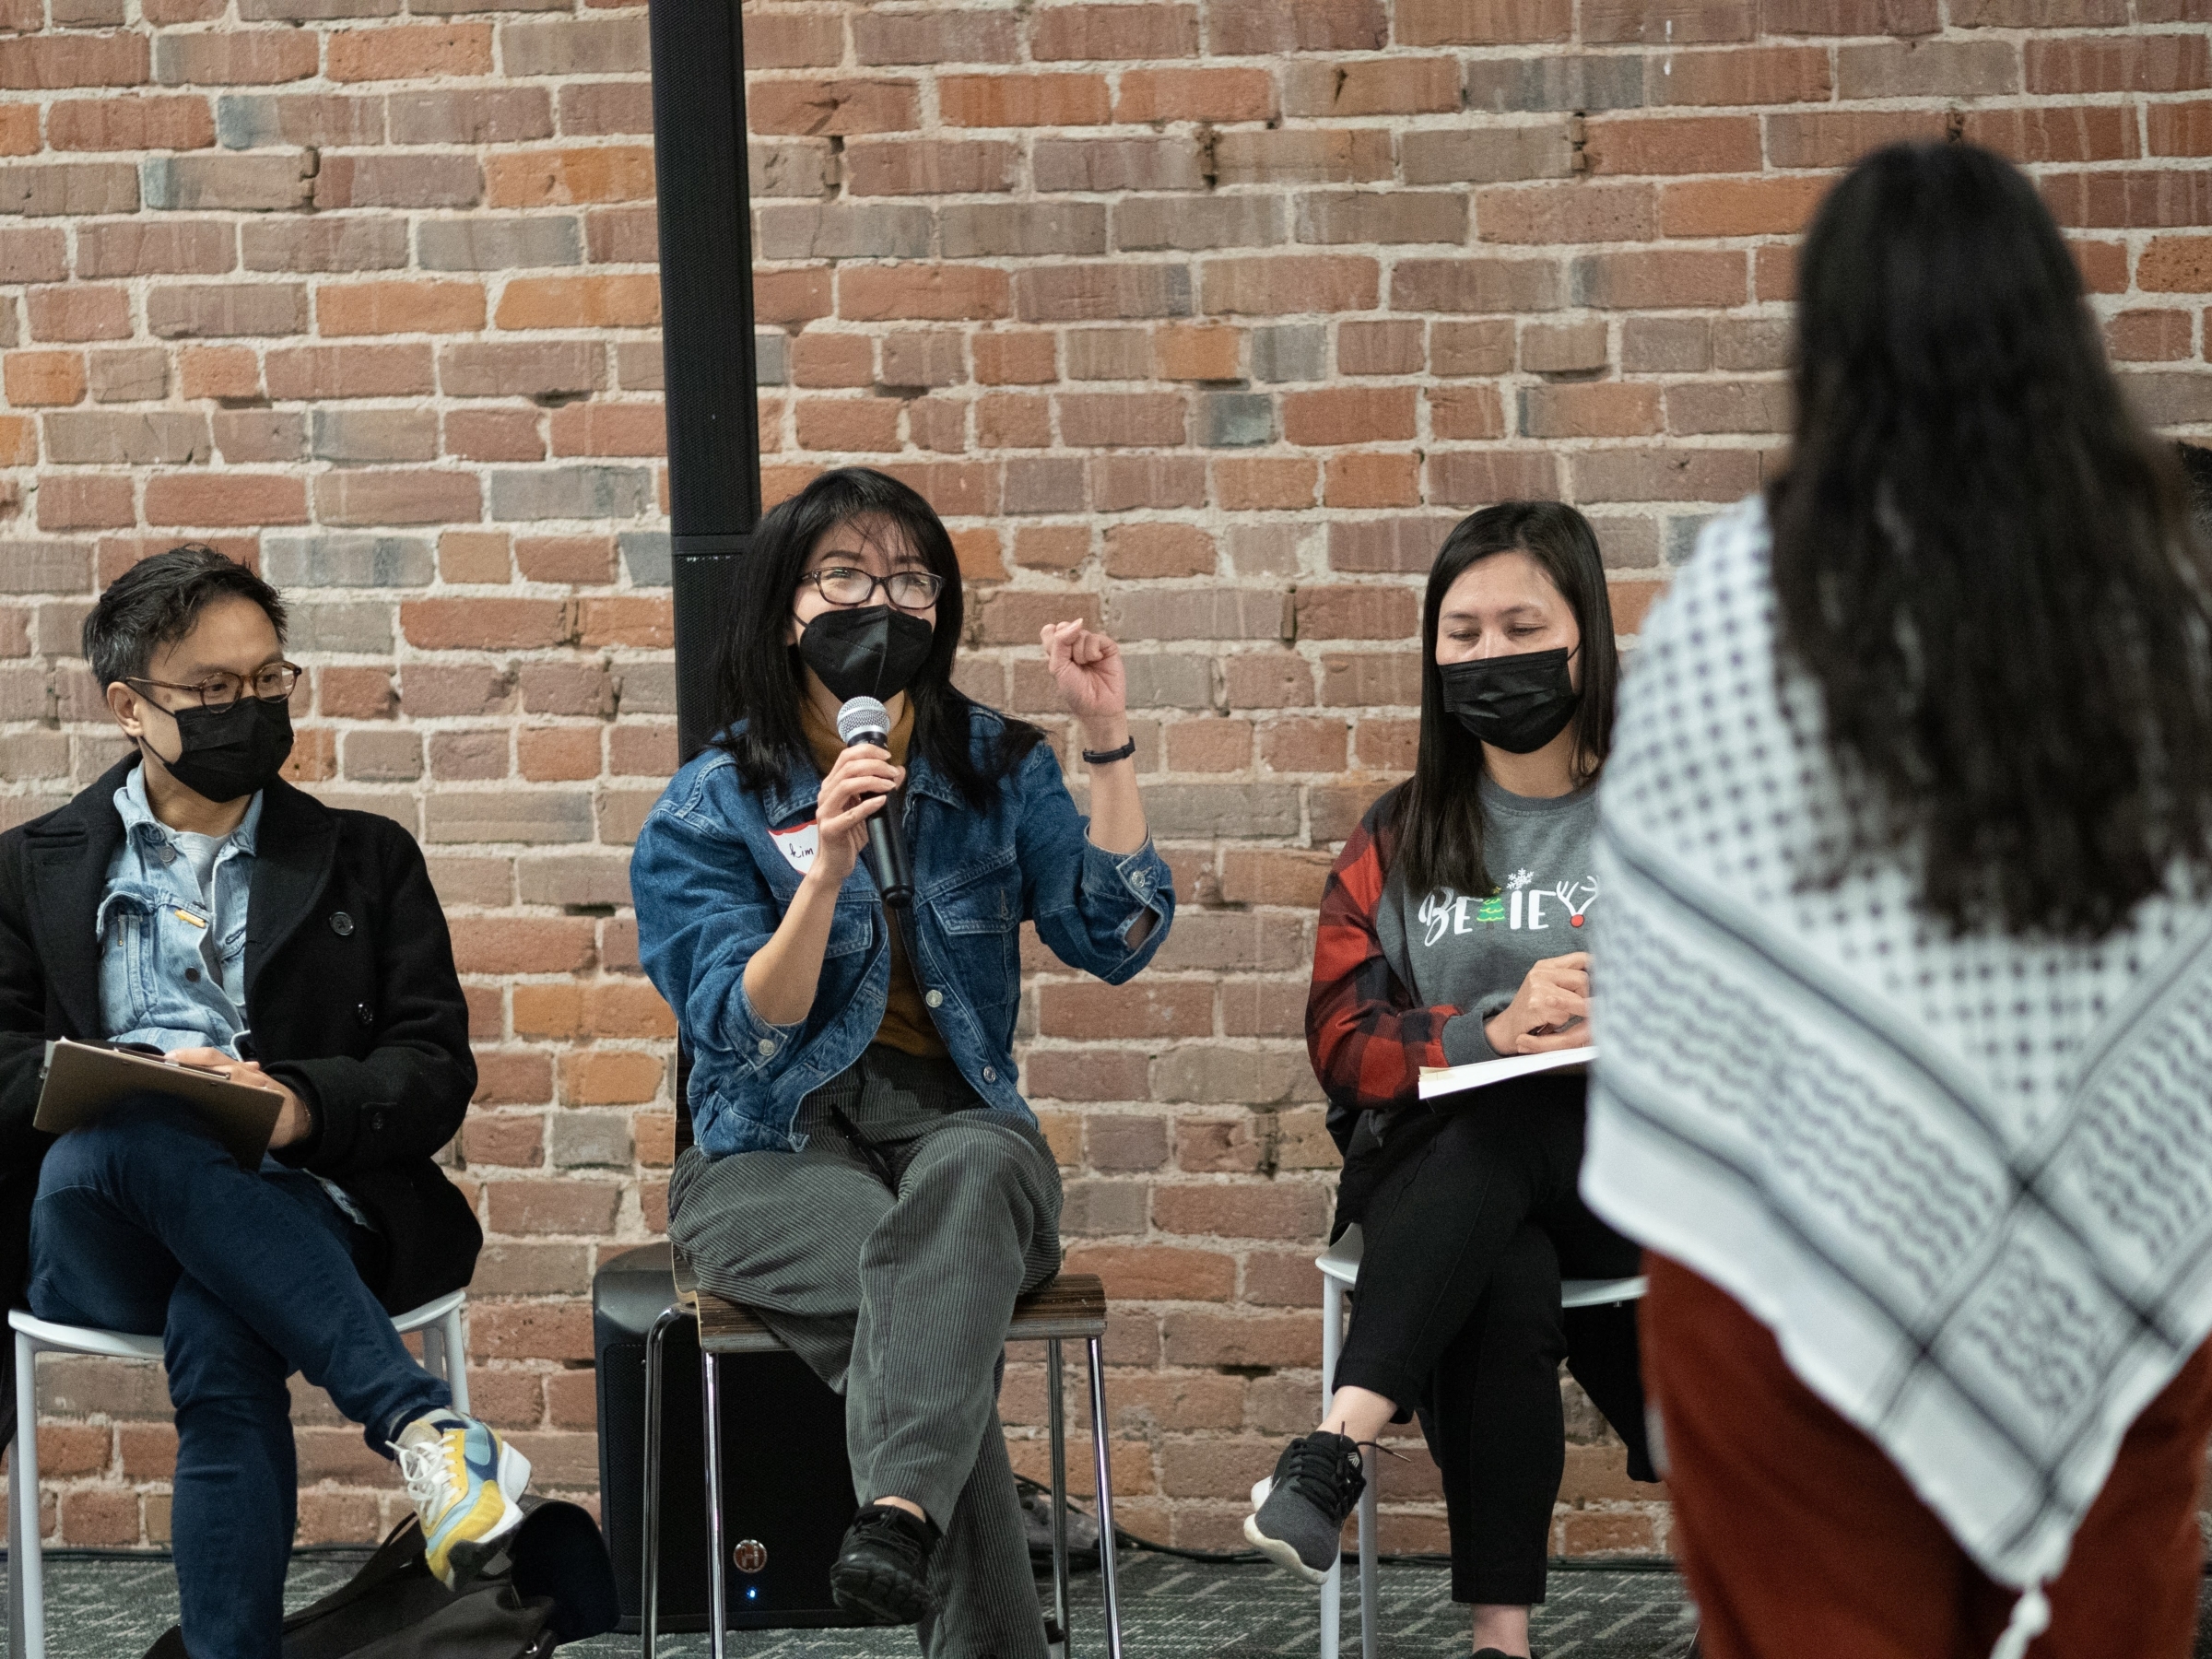 Three ALC staff members, all wearing black masks, sit on chairs in front of a brick wall. The person in the middle is holding a microphone and talking to ALC staff at our December 2023 retreat.